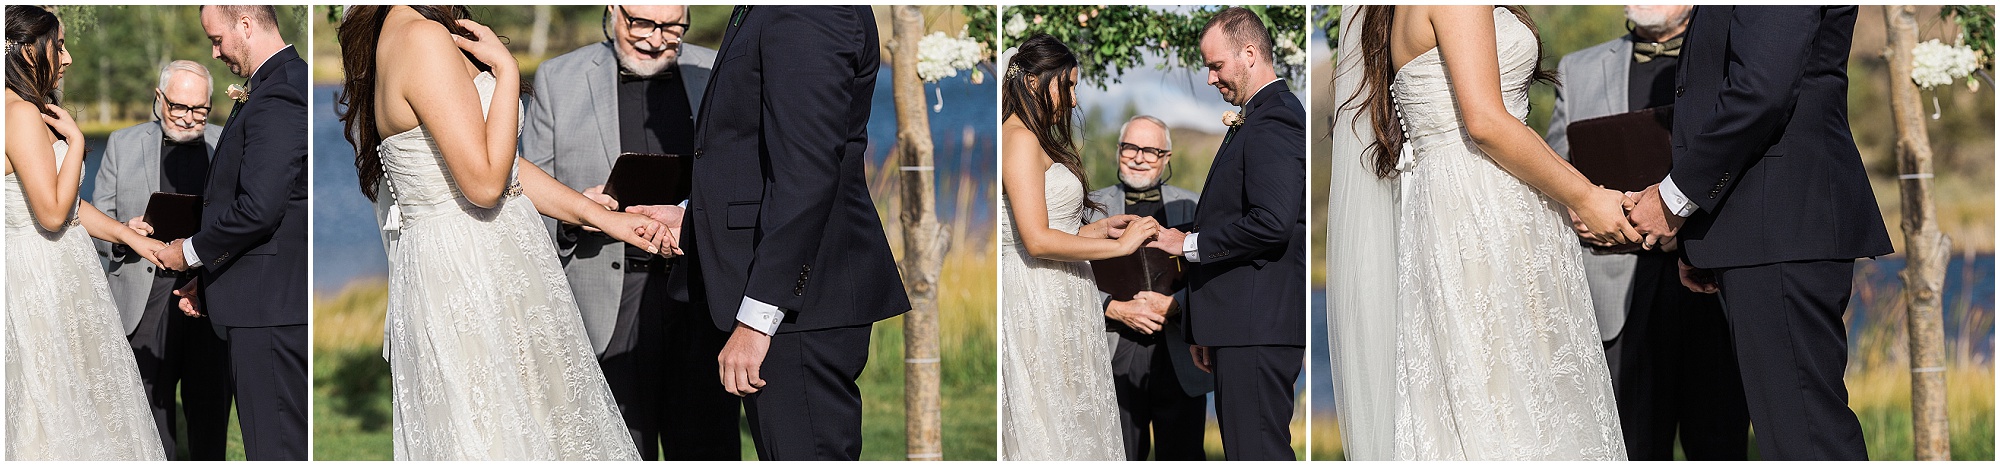 The happy couple exchanges their rings during their outdoor wedding ceremony at Ranch at the Canyons in Terrebonne, OR. | Erica Swantek Photography